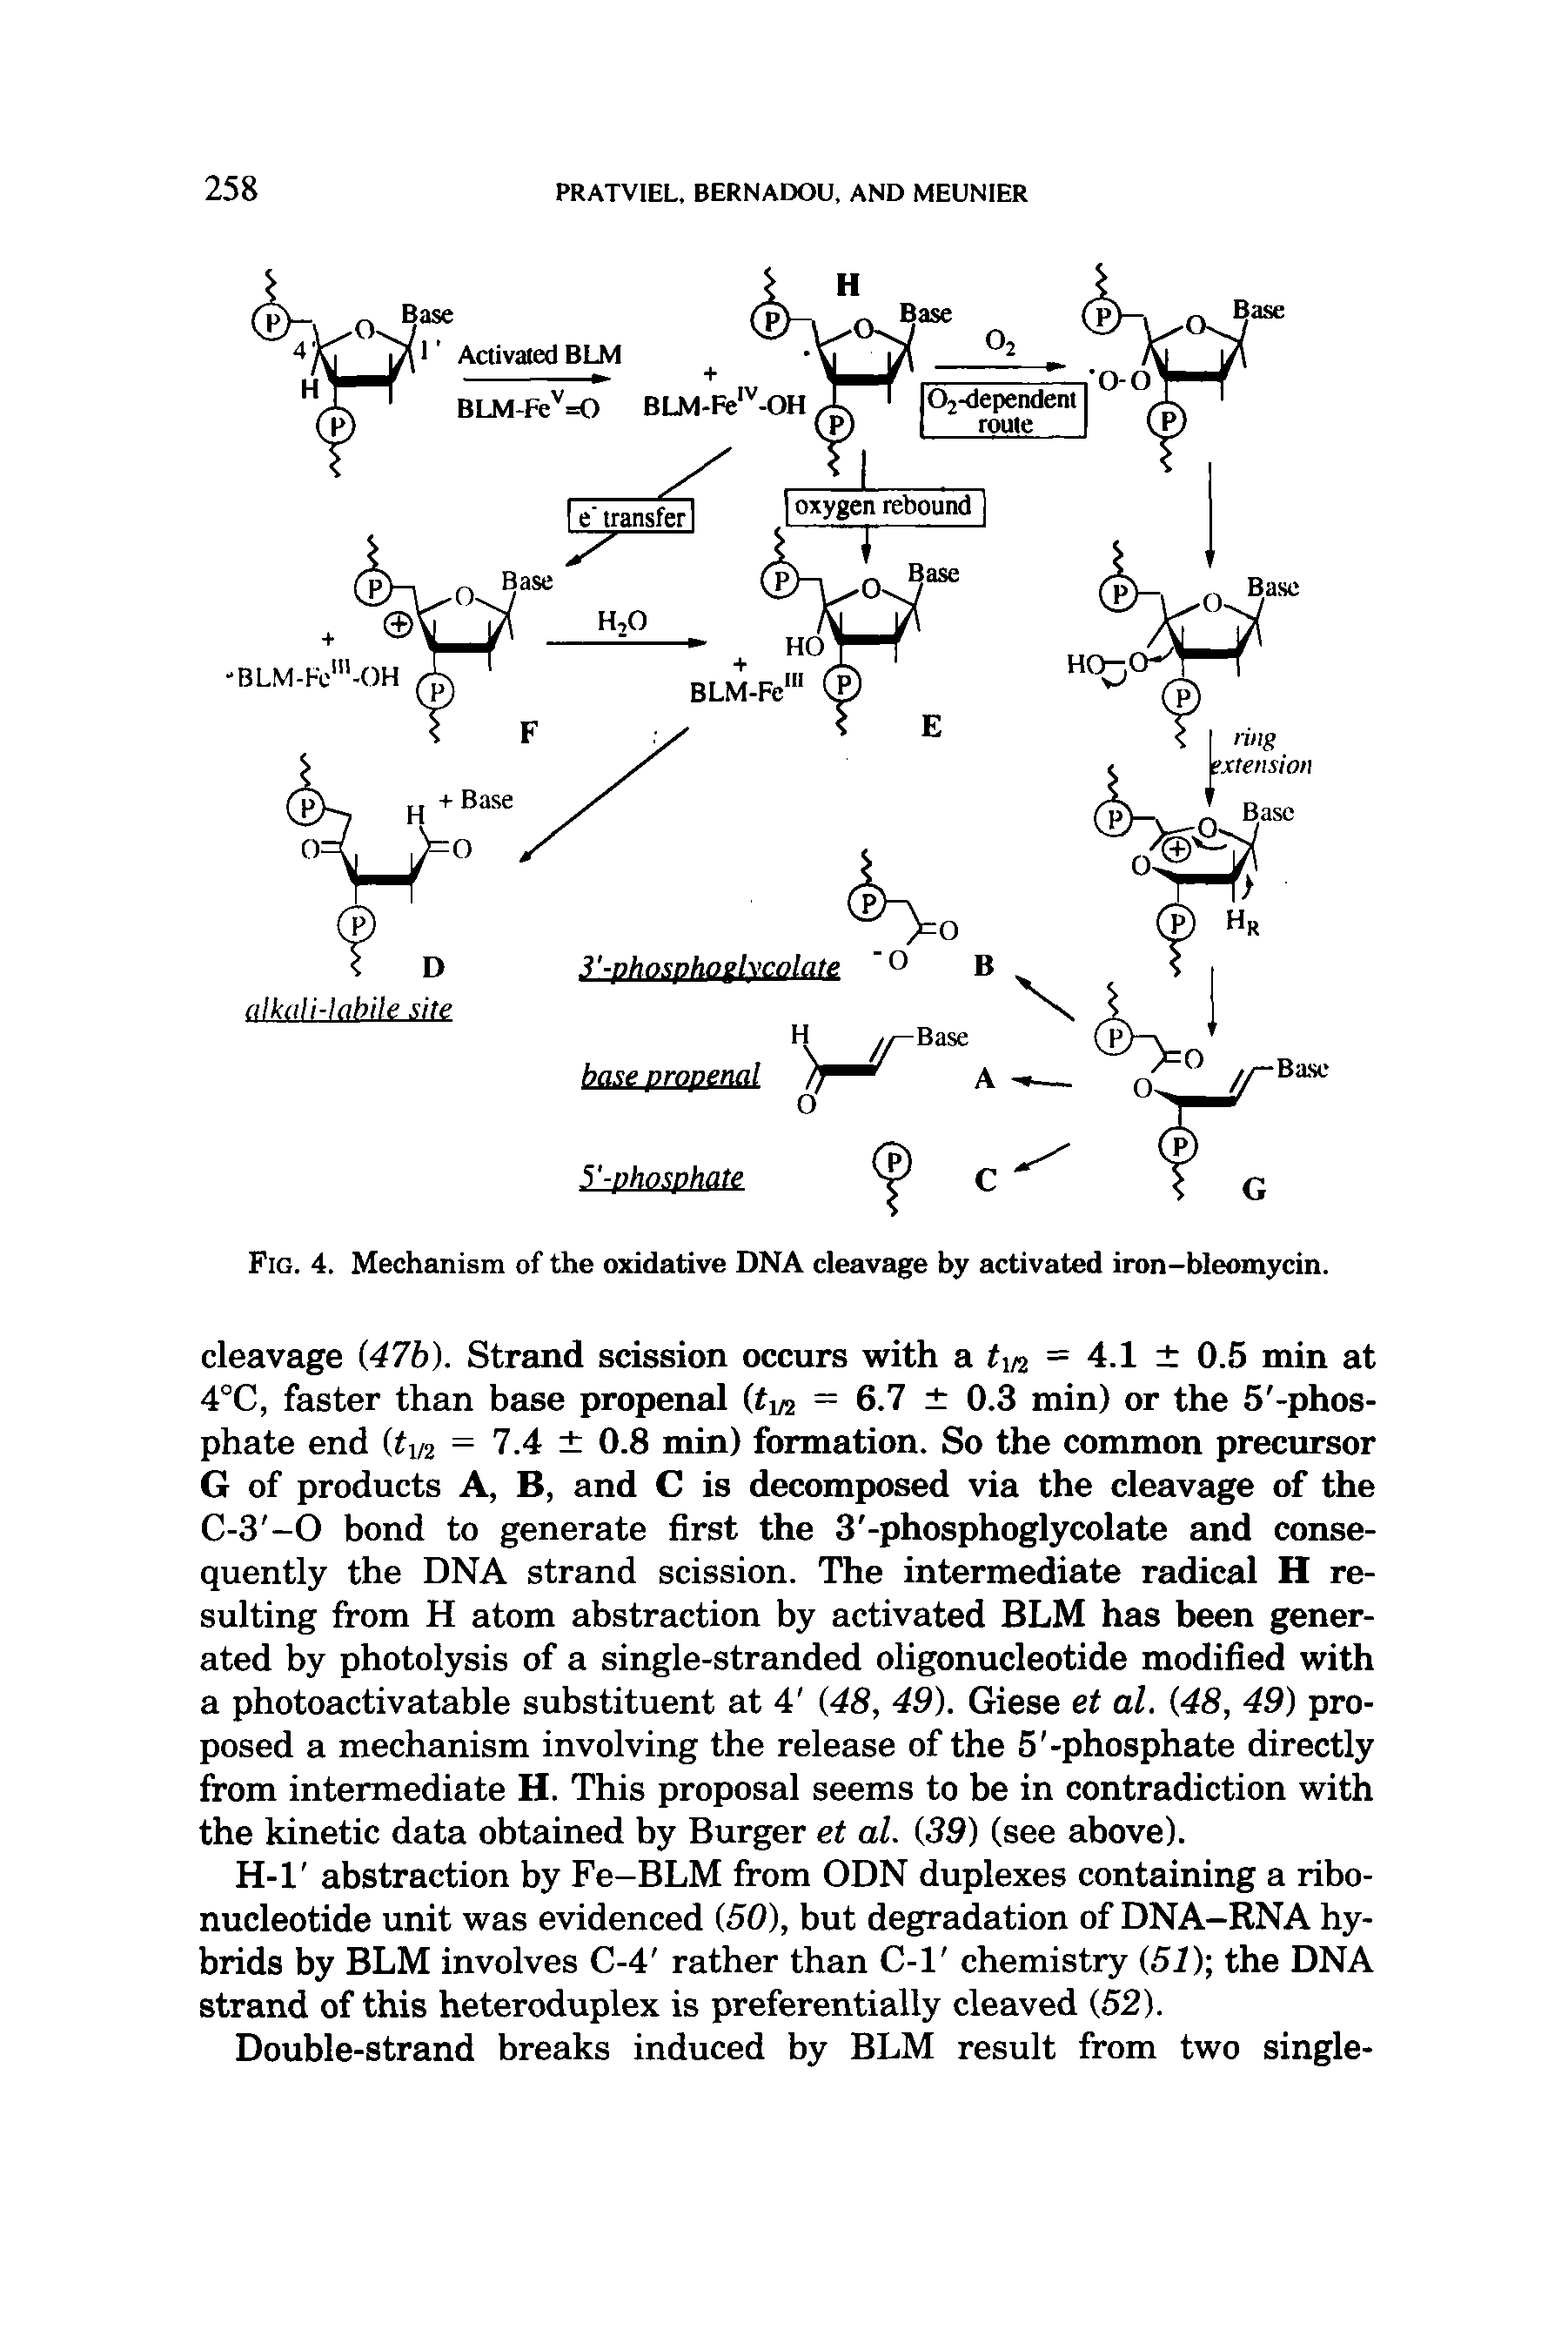 Fig. 4. Mechanism of the oxidative DNA cleavage by activated iron-bleomycin.